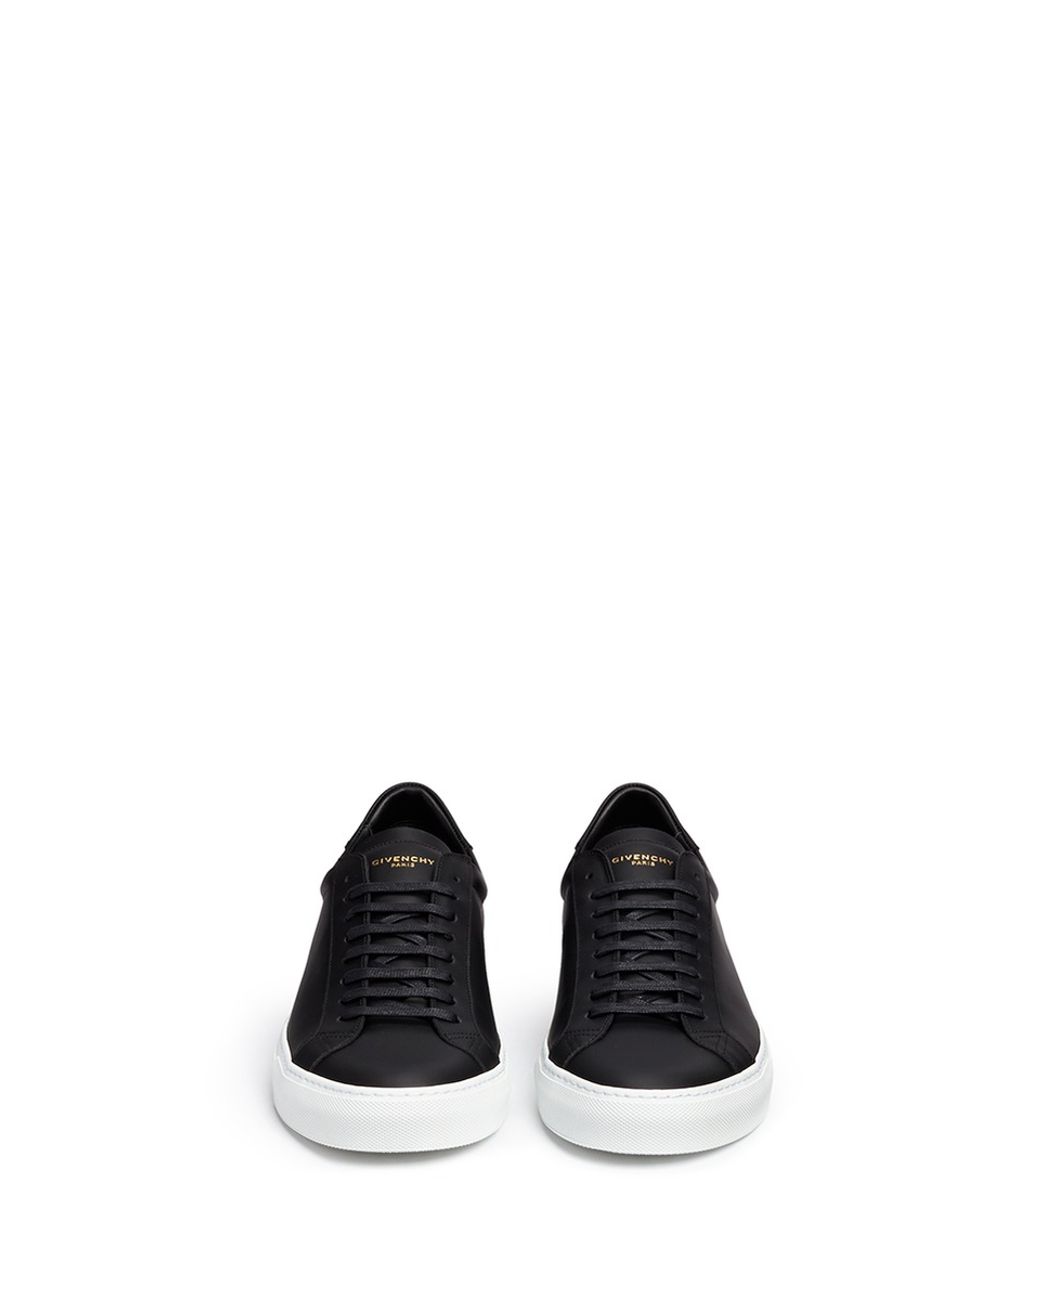 Givenchy 'paris 17' Leather Low Top Sneakers in Black for Men | Lyst